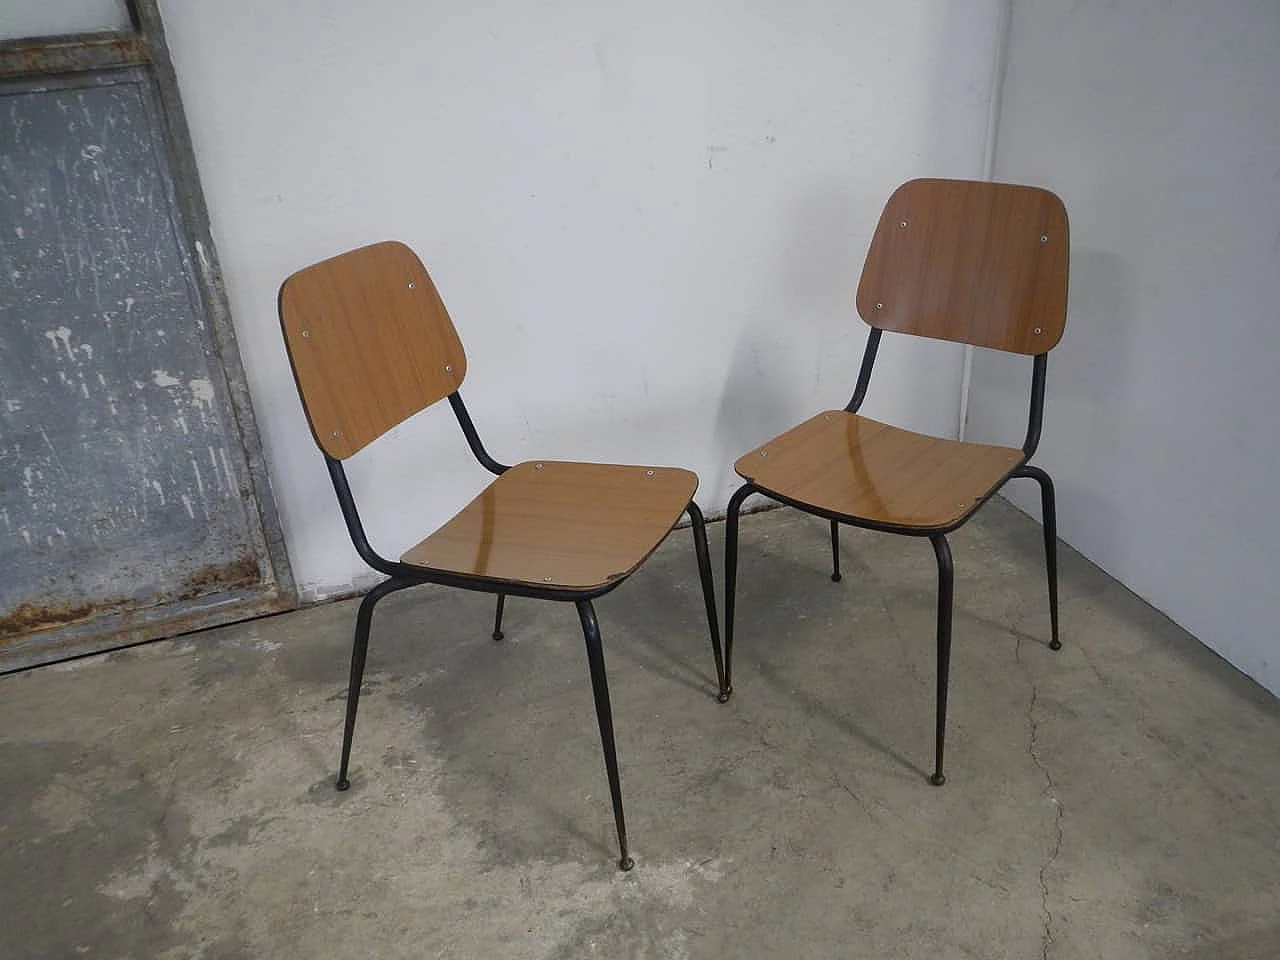 Pair of laminated chairs, 1950s 1062101